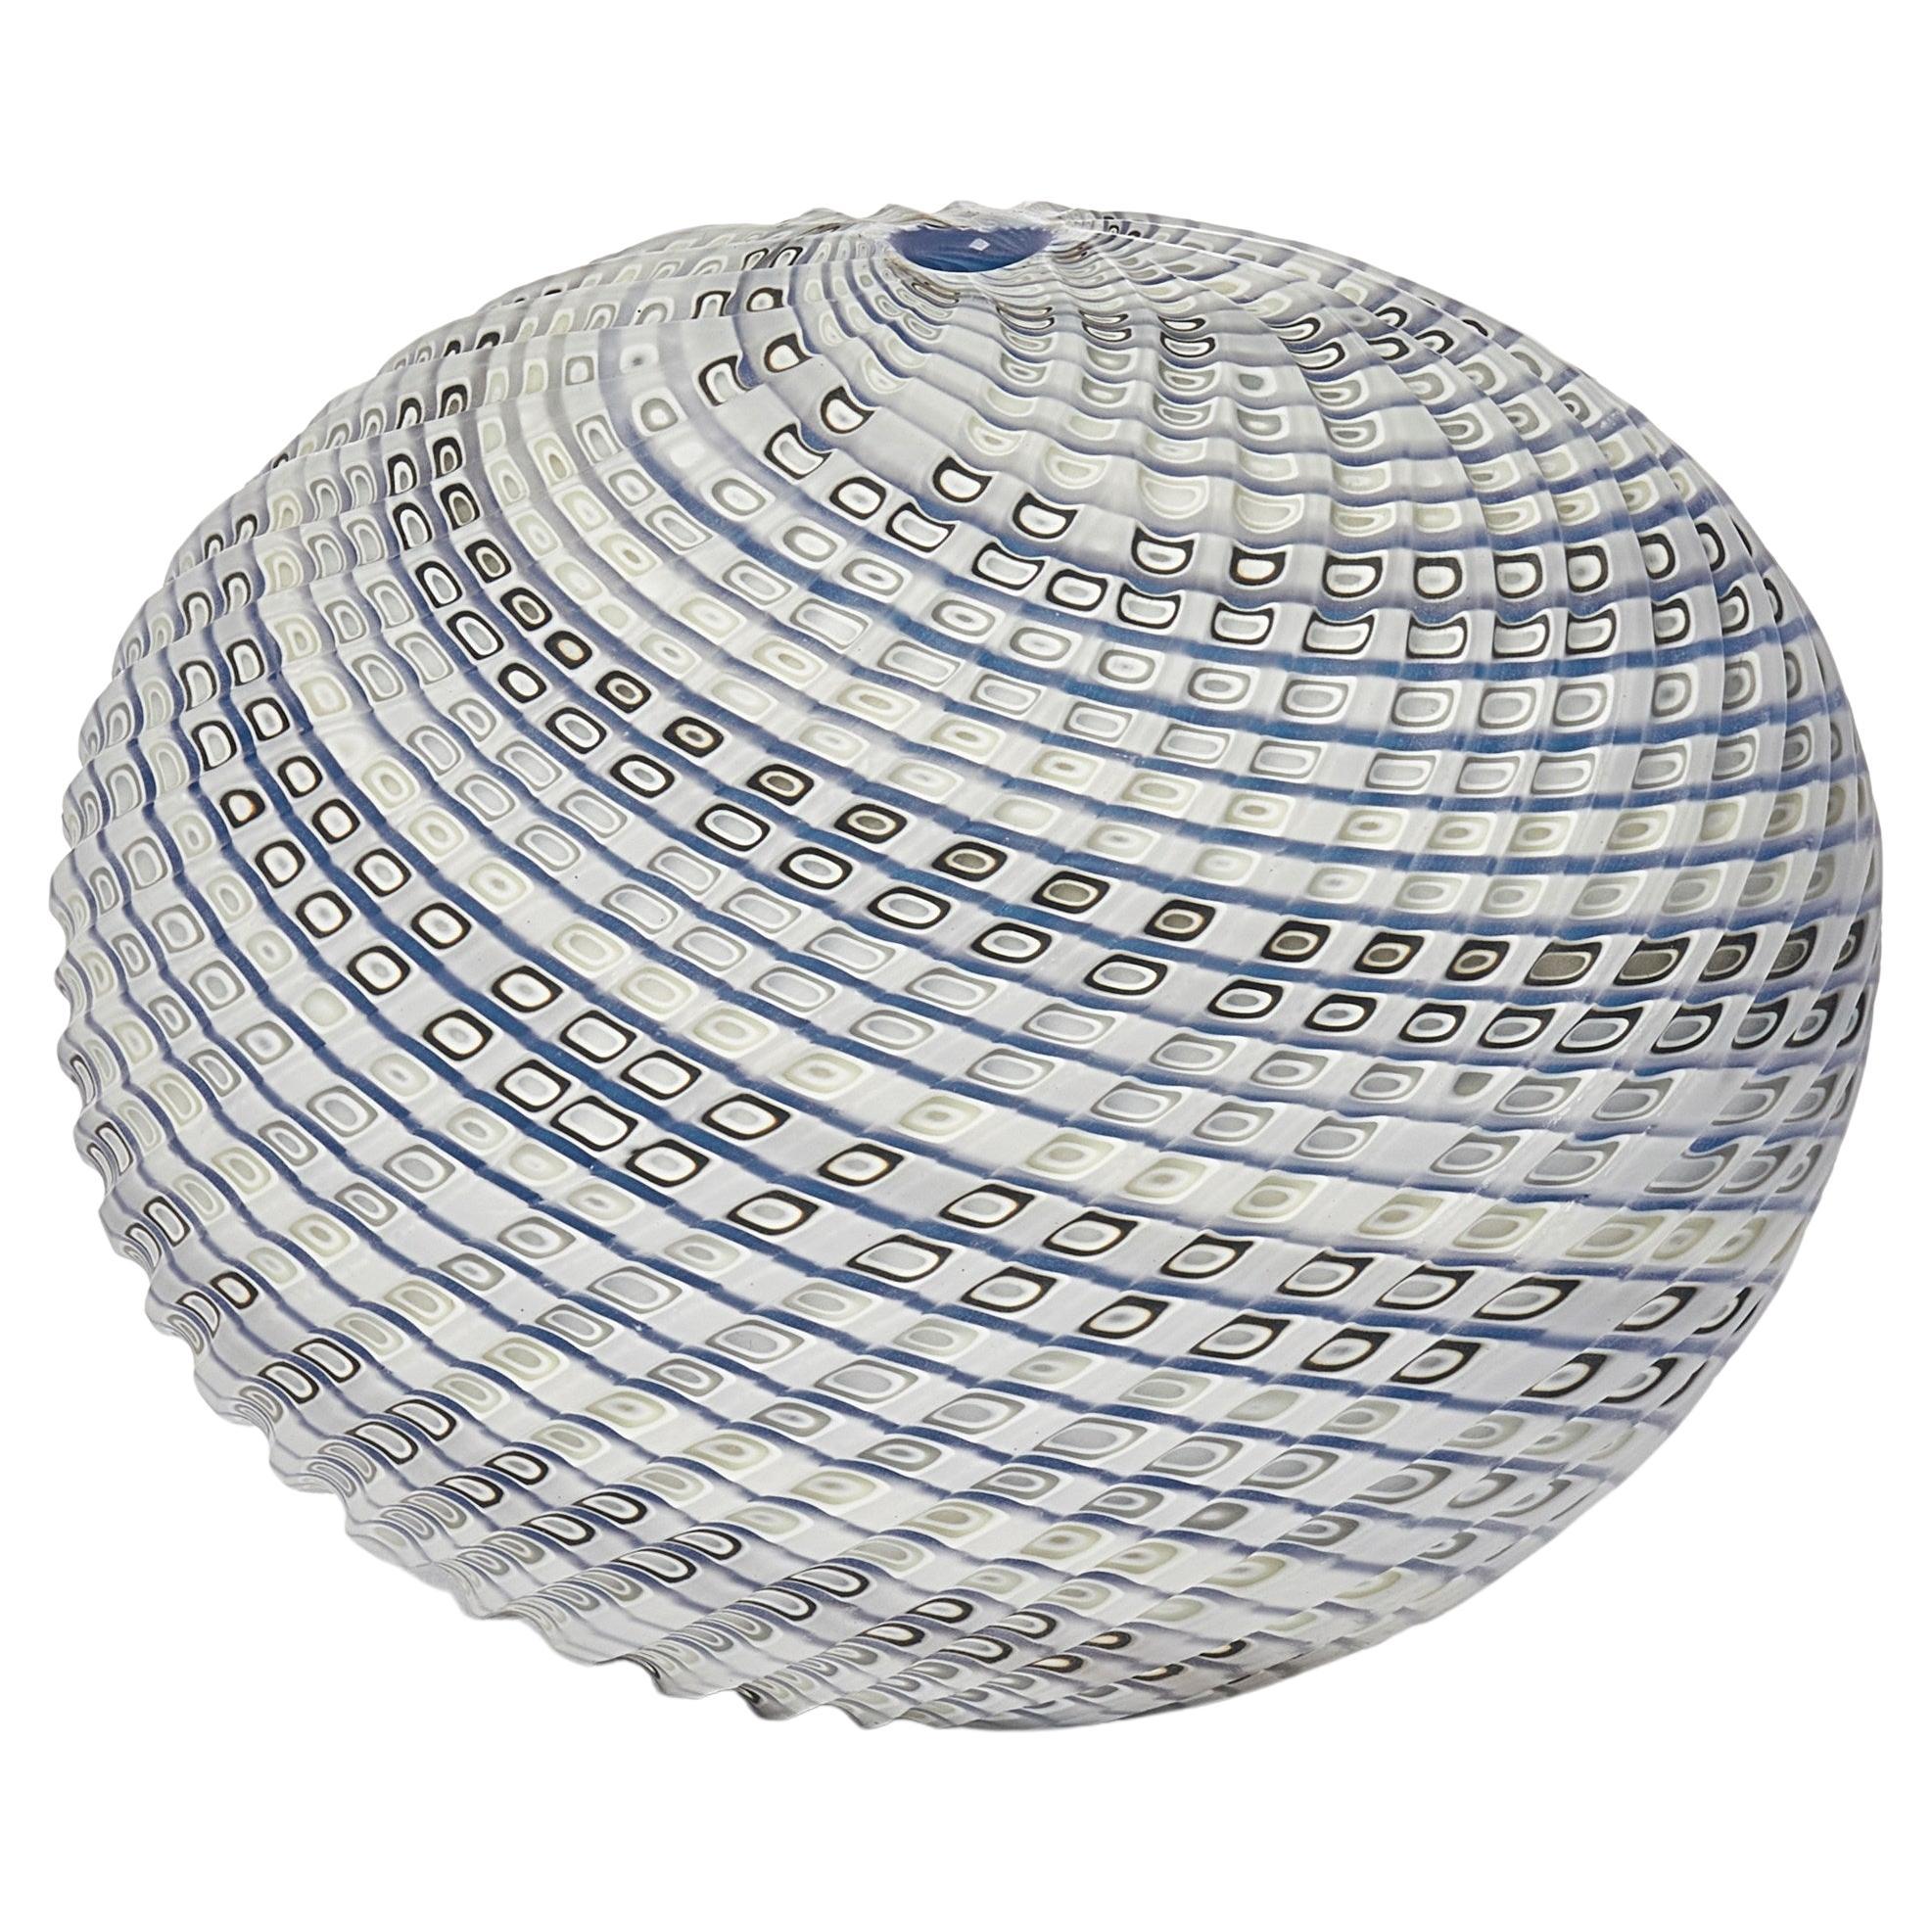 Woven Three Tone Blue Pebble, textured glass sculptural object by Layne Rowe For Sale